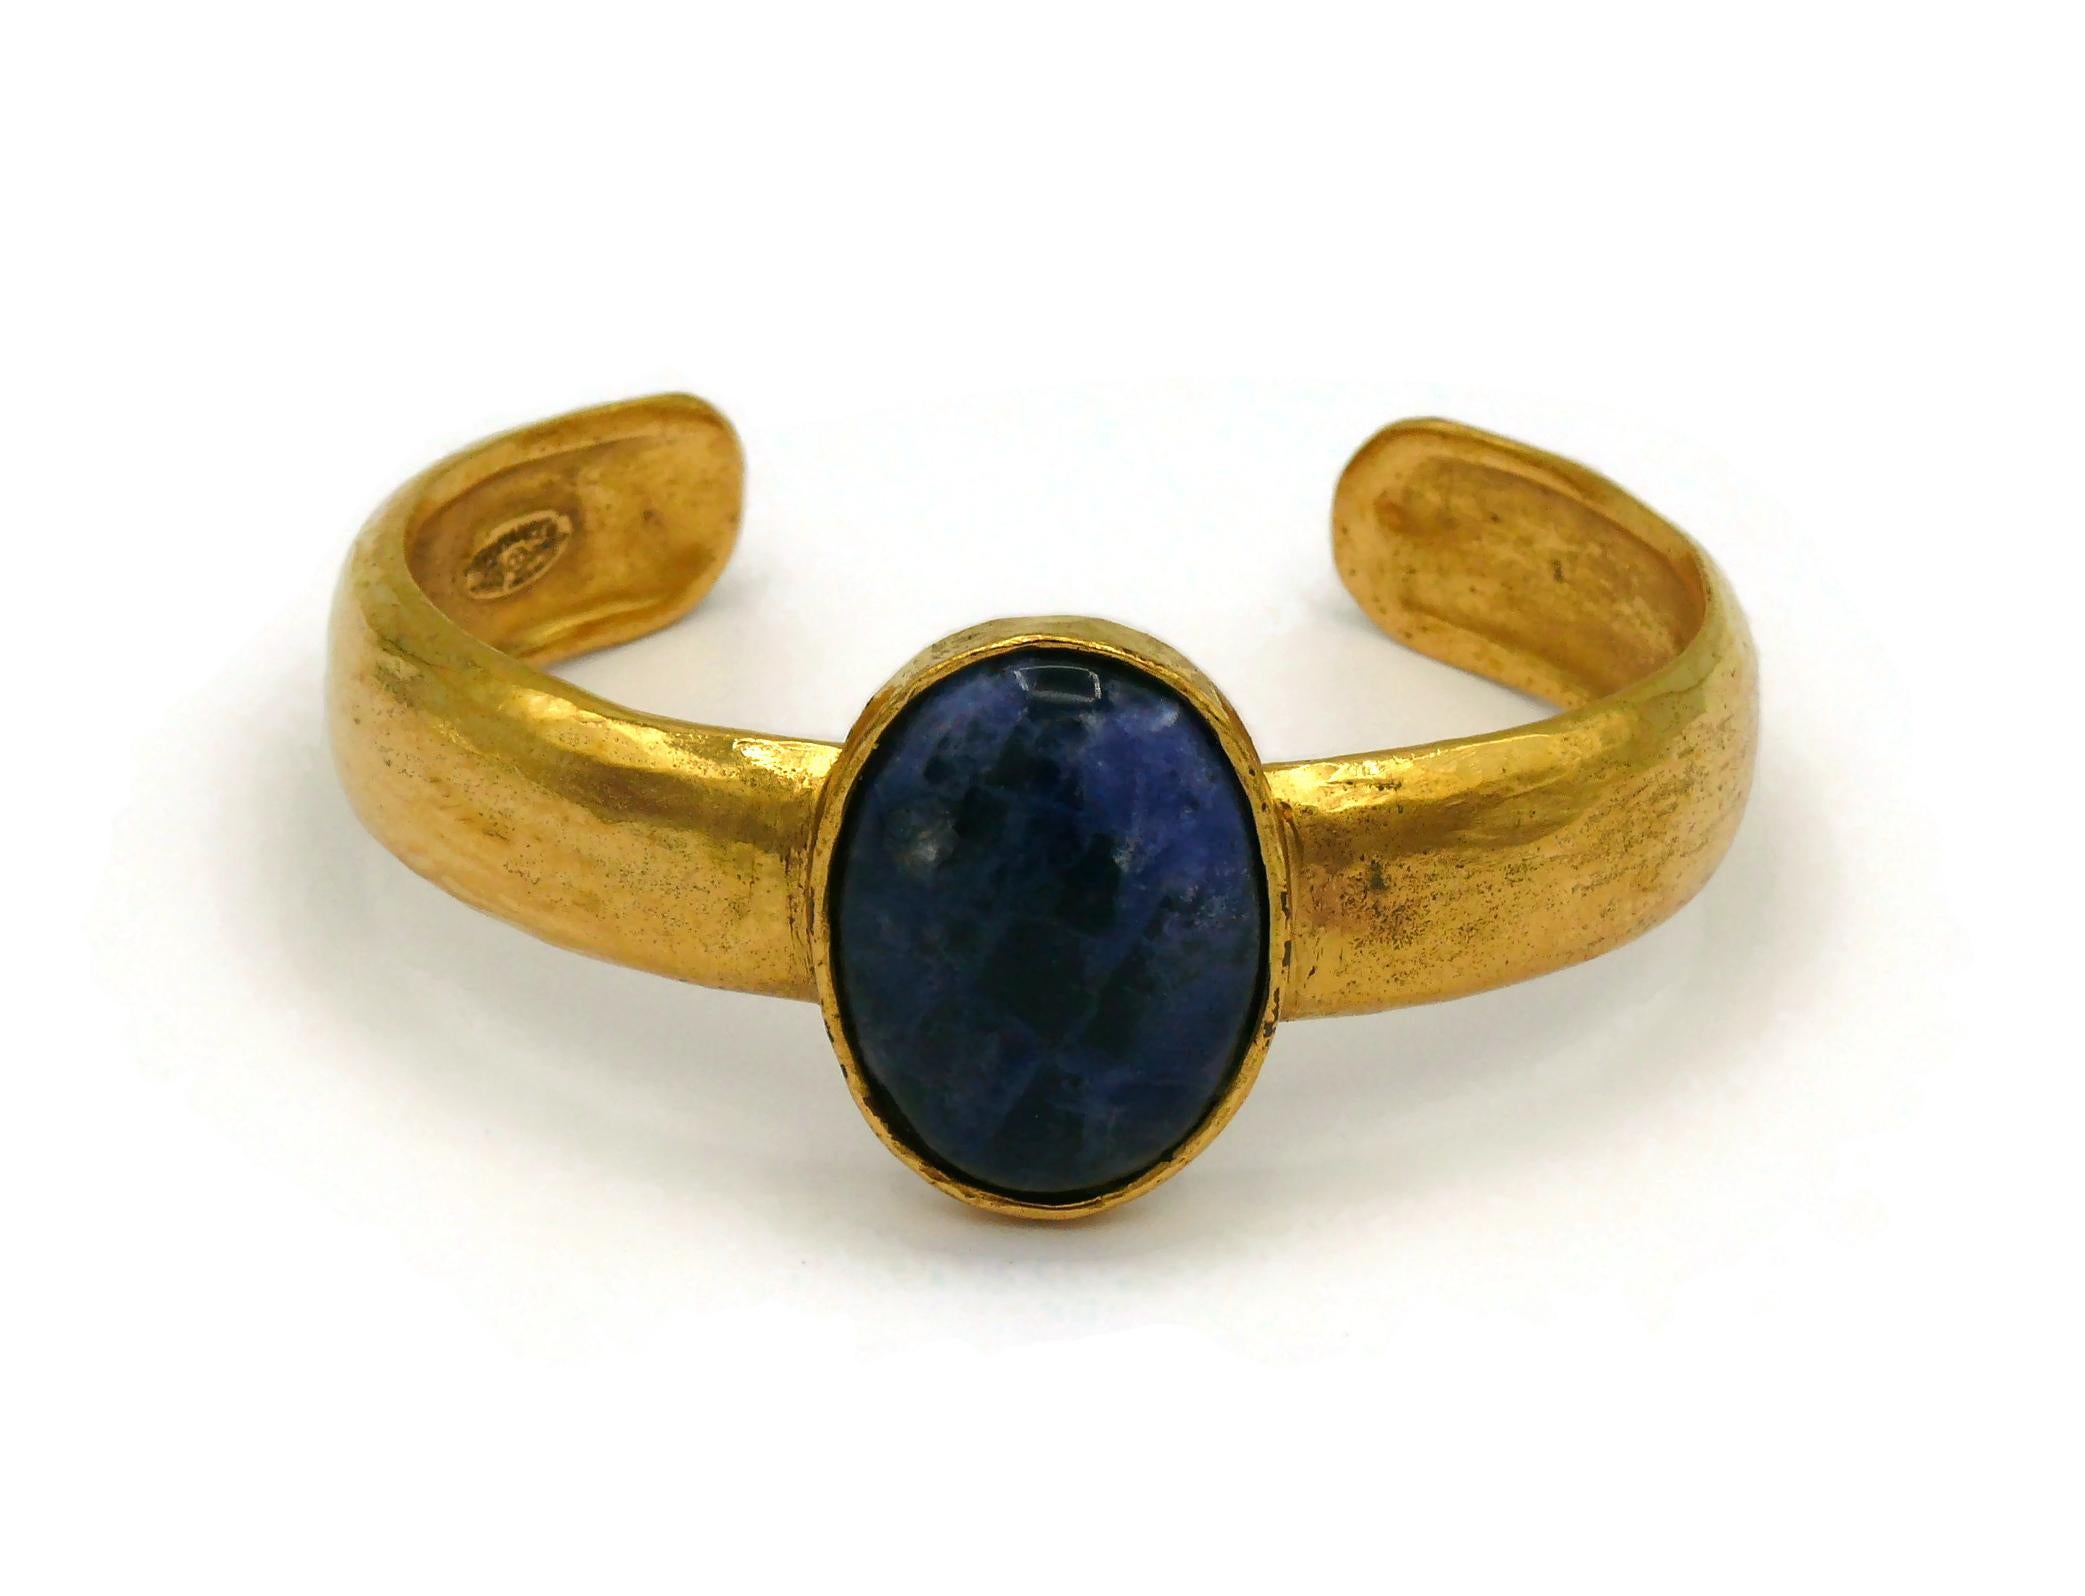 CHANEL by KARL LAGERFELD Vintage Gold Tone Blue Stone Bangle Bracelet, Fall 1996 In Good Condition For Sale In Nice, FR